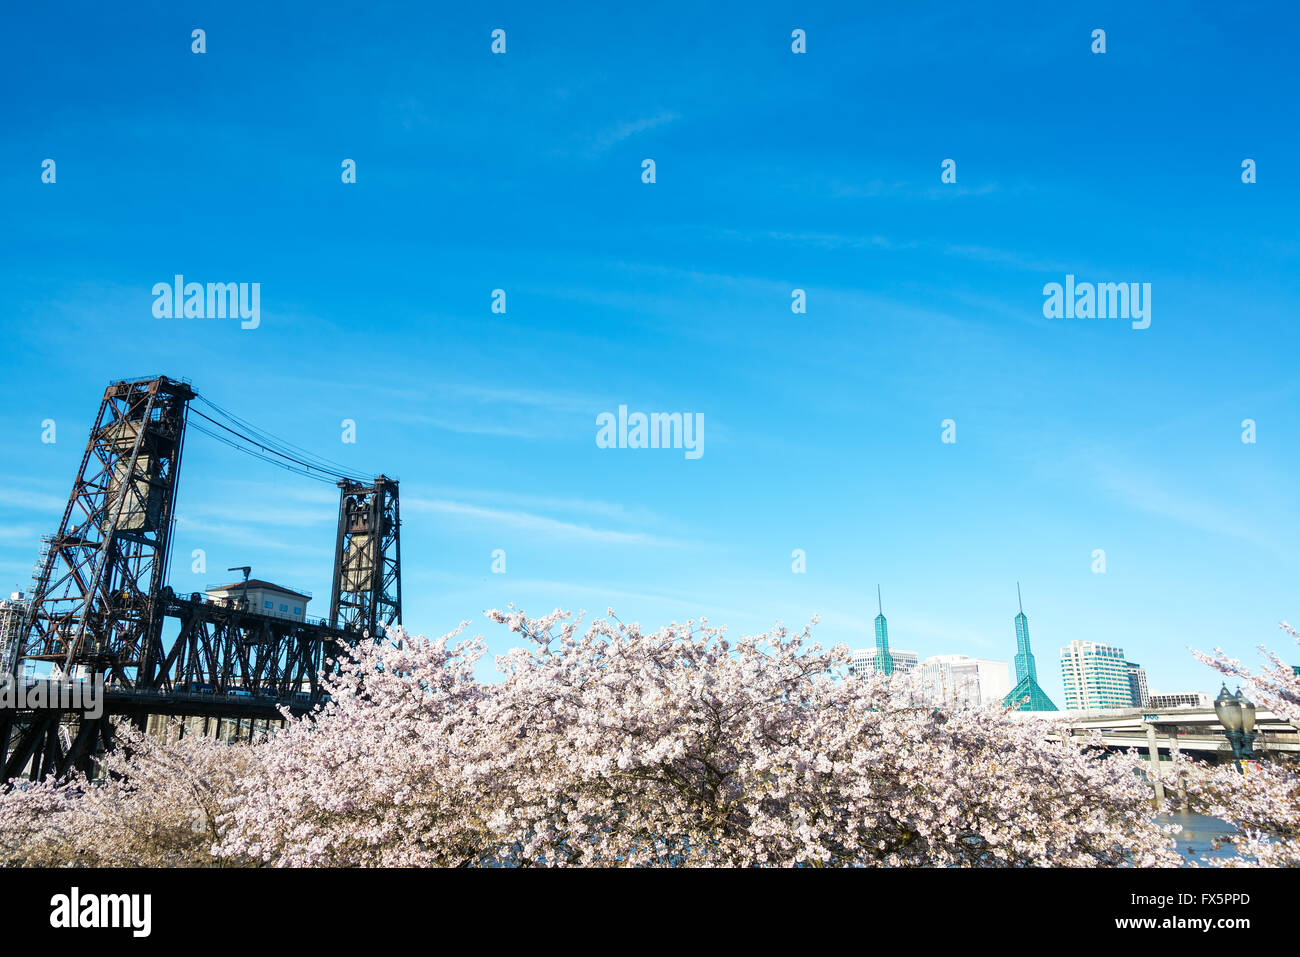 View of blooming cherry blossoms and the Steel Bridge in Portland, Oregon Stock Photo